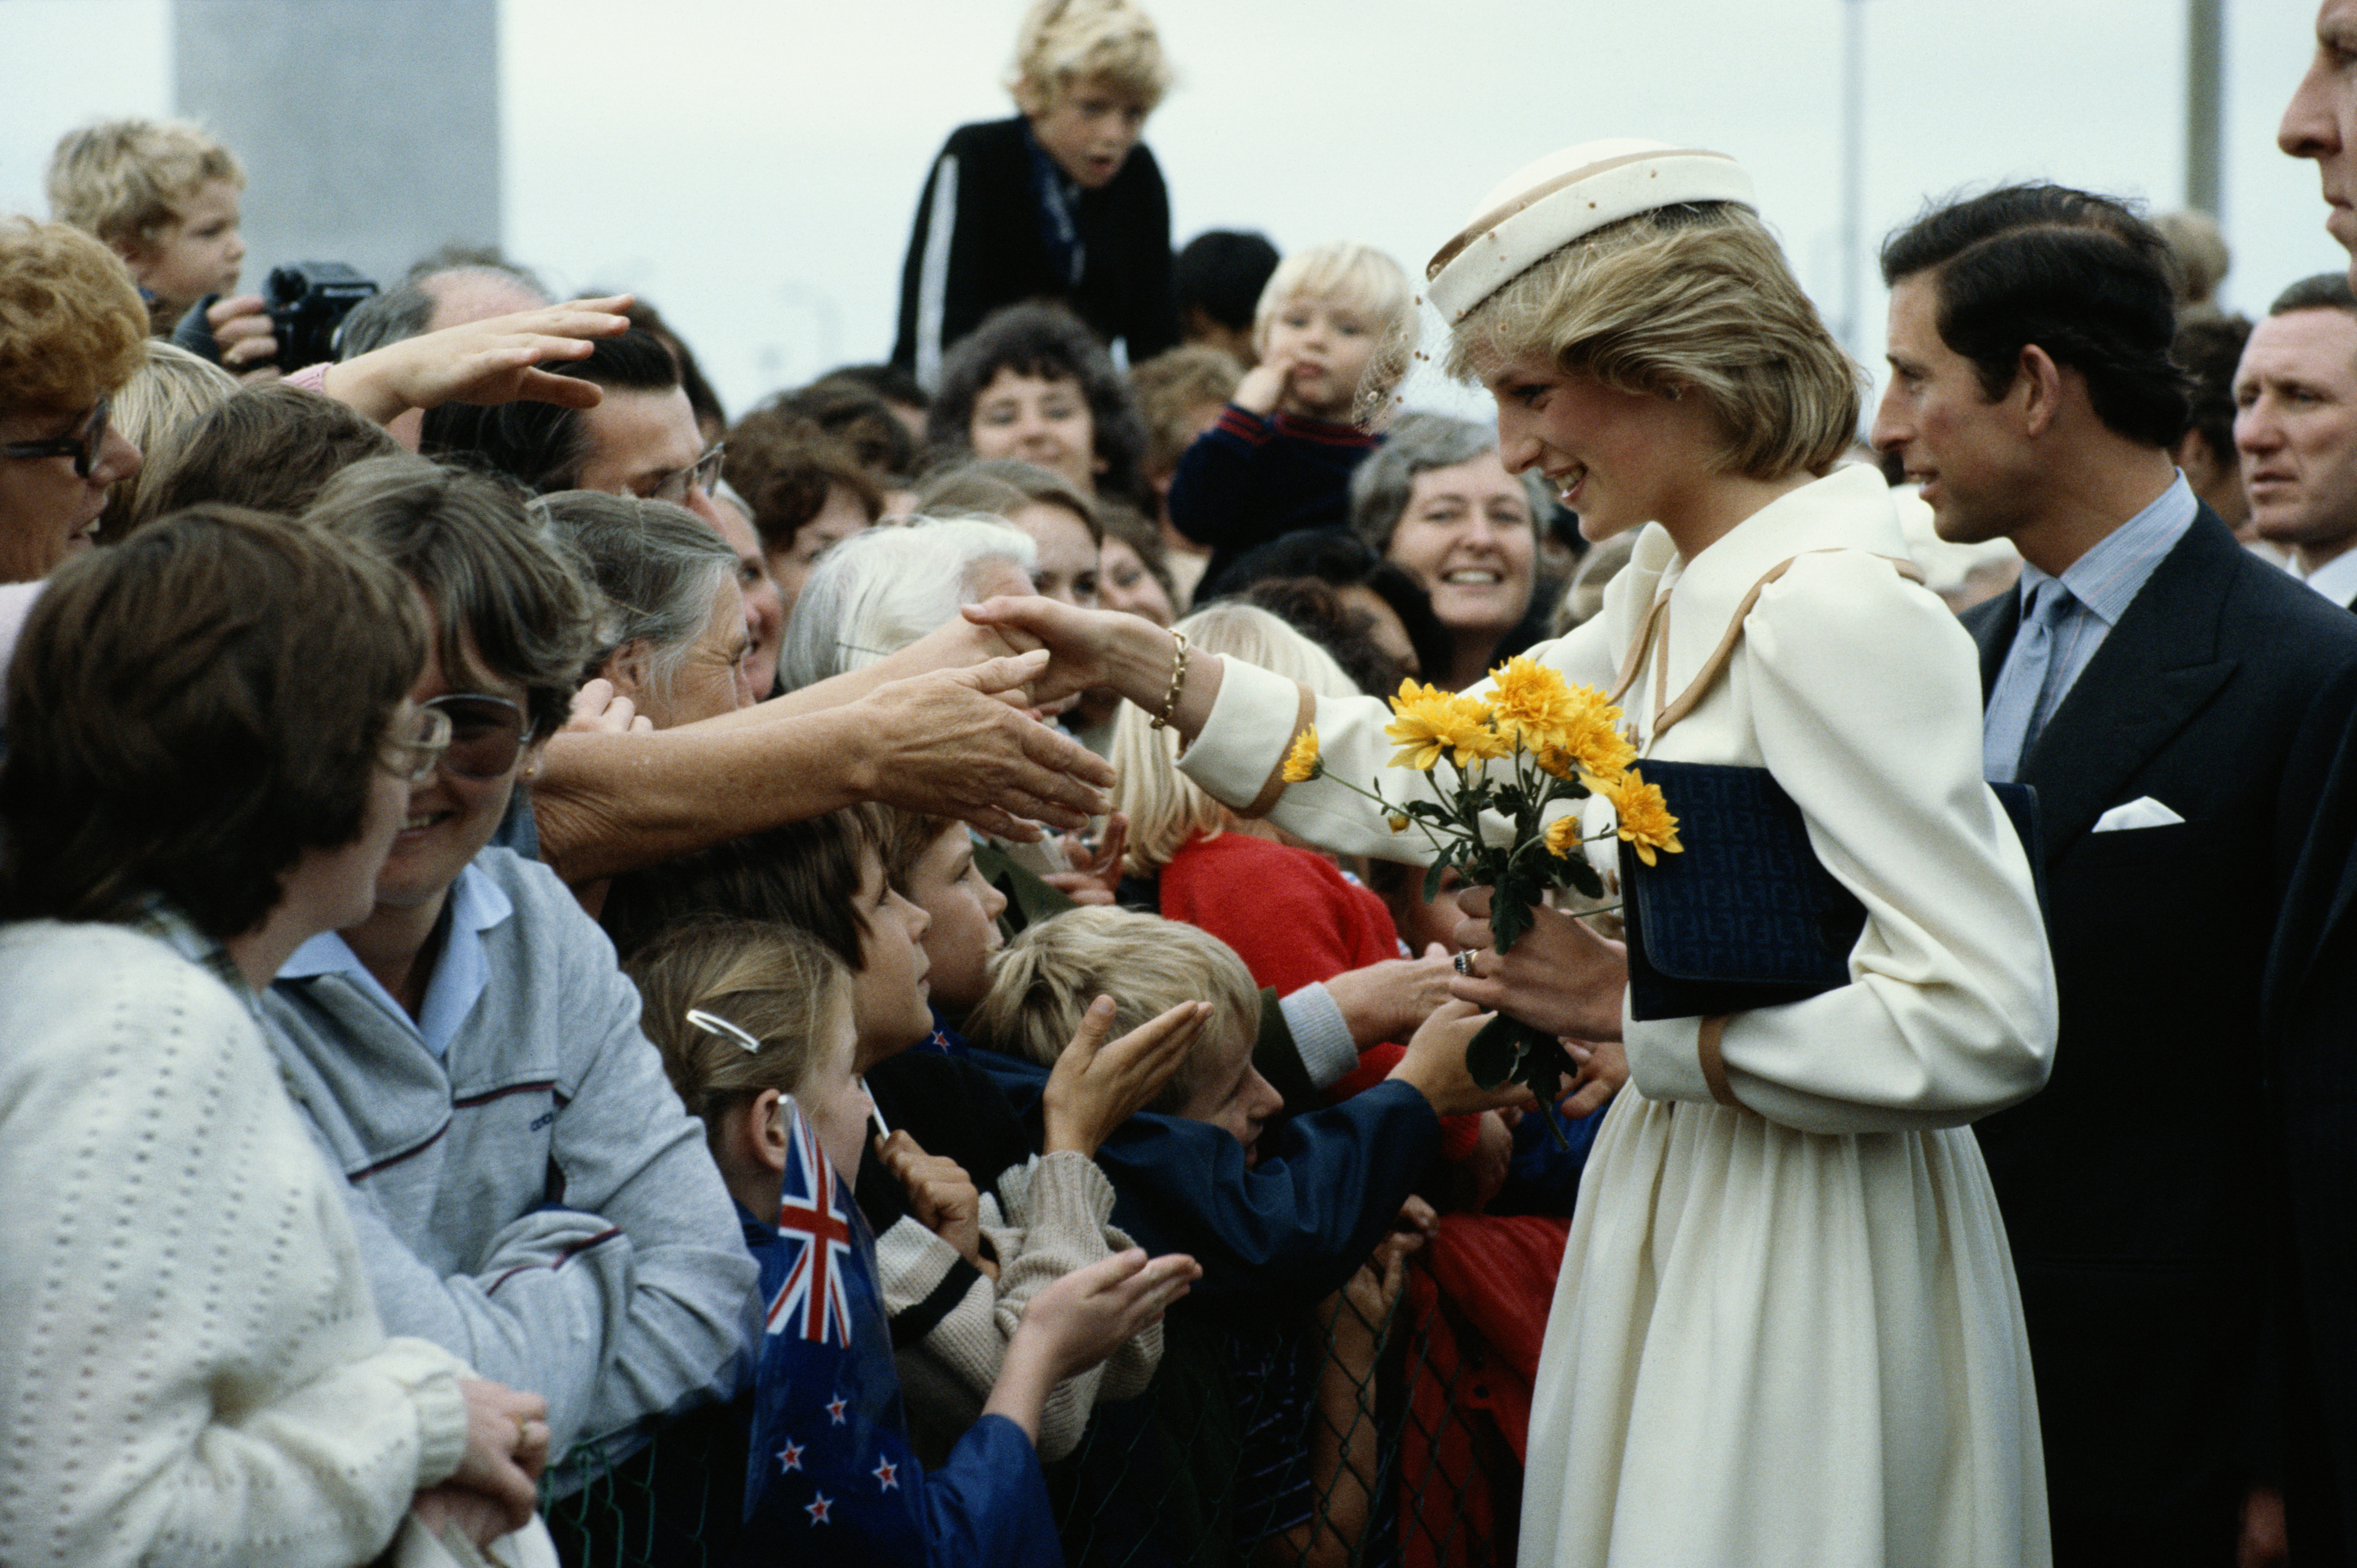 Late Princess Diana and King Charles III meeting the crowd during their arrival in Auckland, New Zealand on April 17, 1983 | Source: Getty Images